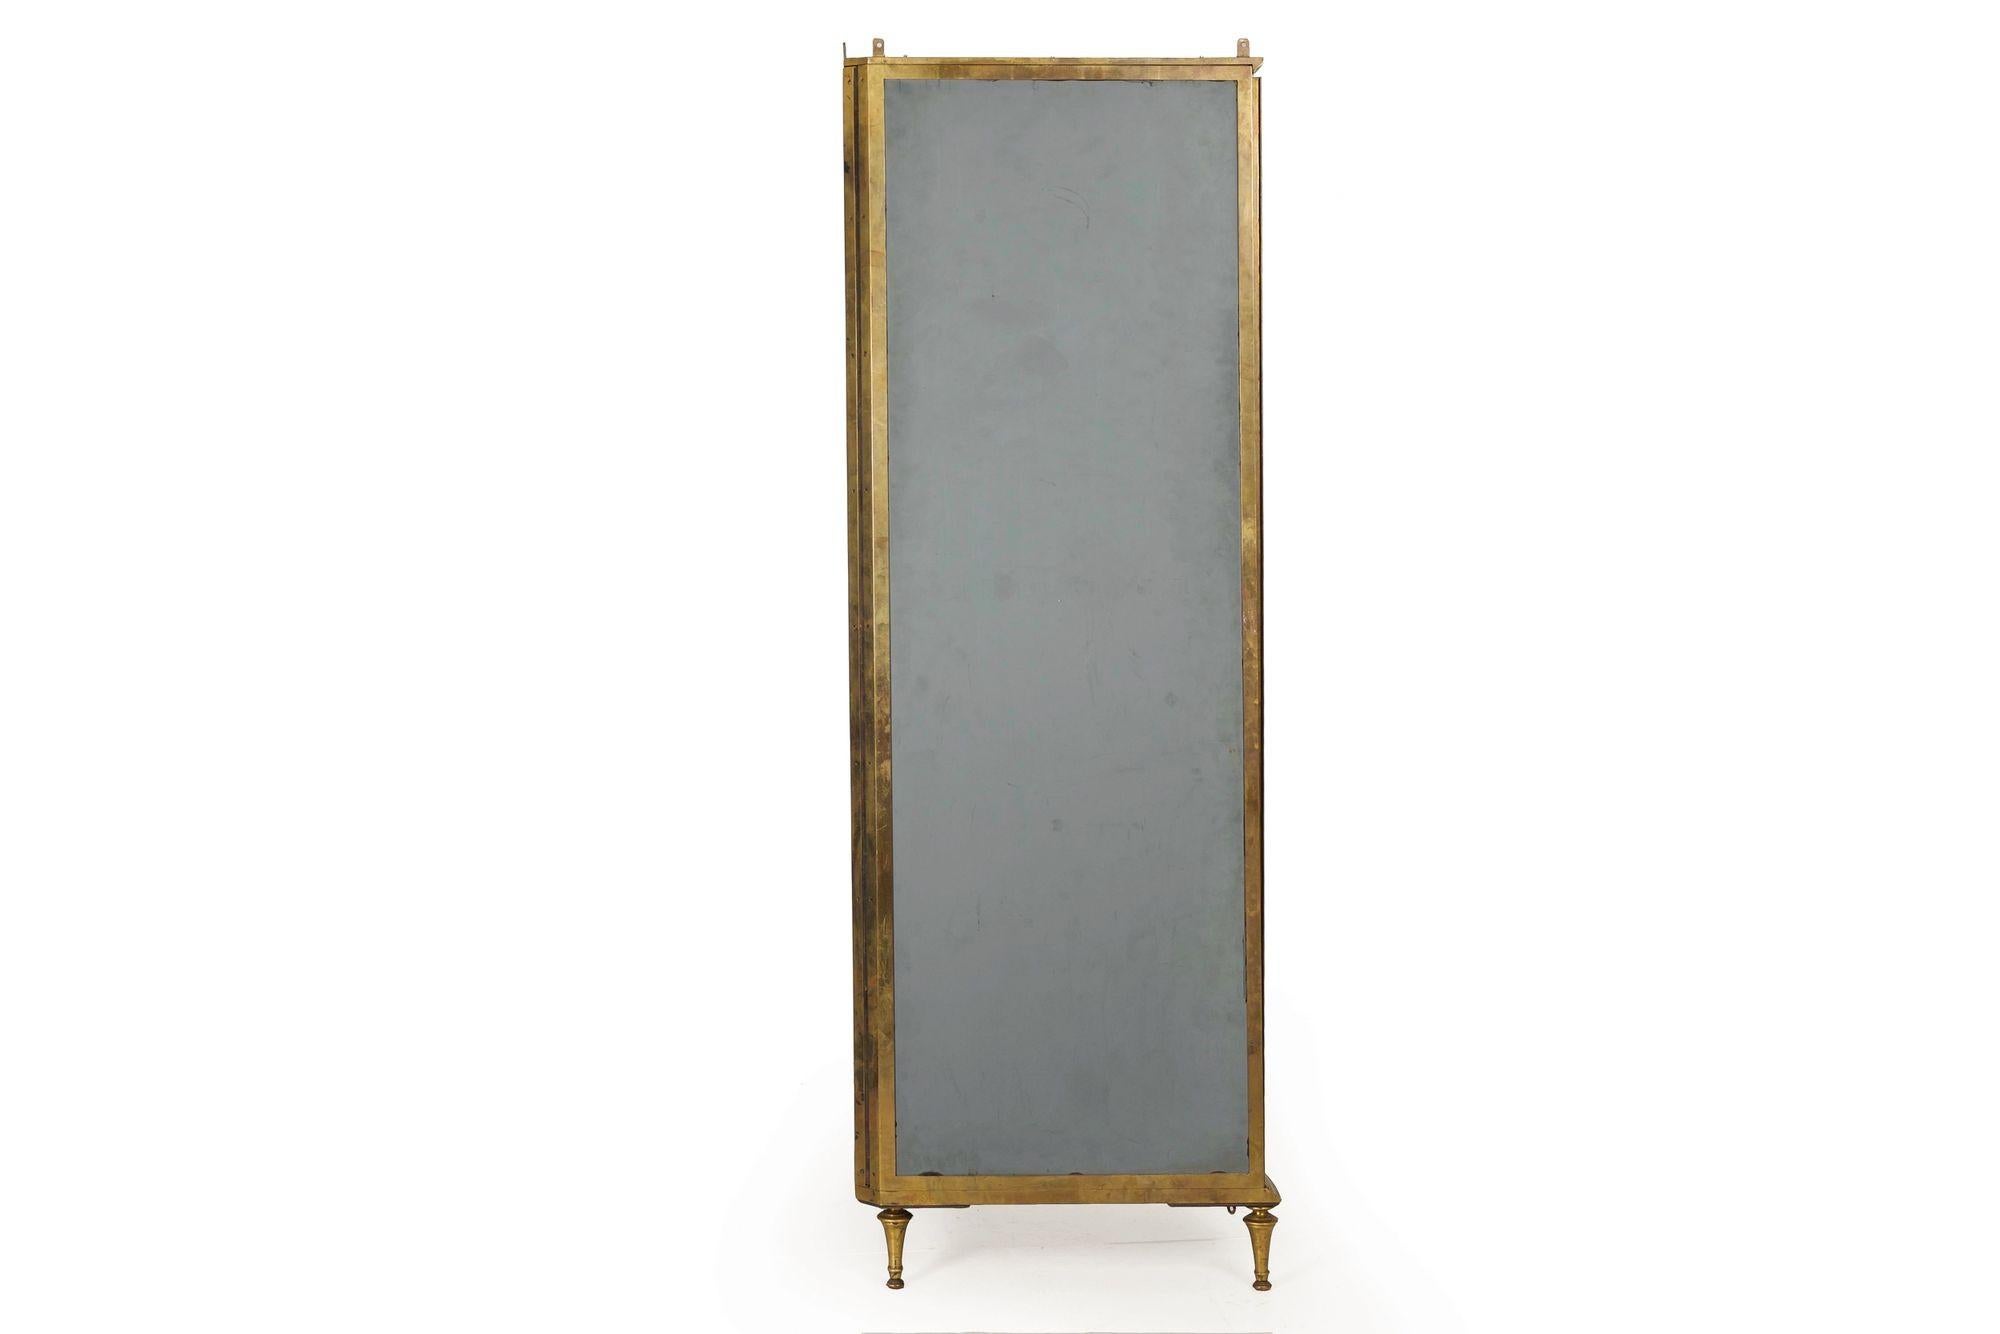 A very finely crafted brass and glass curio cabinet from the second quarter of the 20th century, it features a curved front profile against a triangulated back intended for placement in a corner. The cabinet features four original tabs that allow it